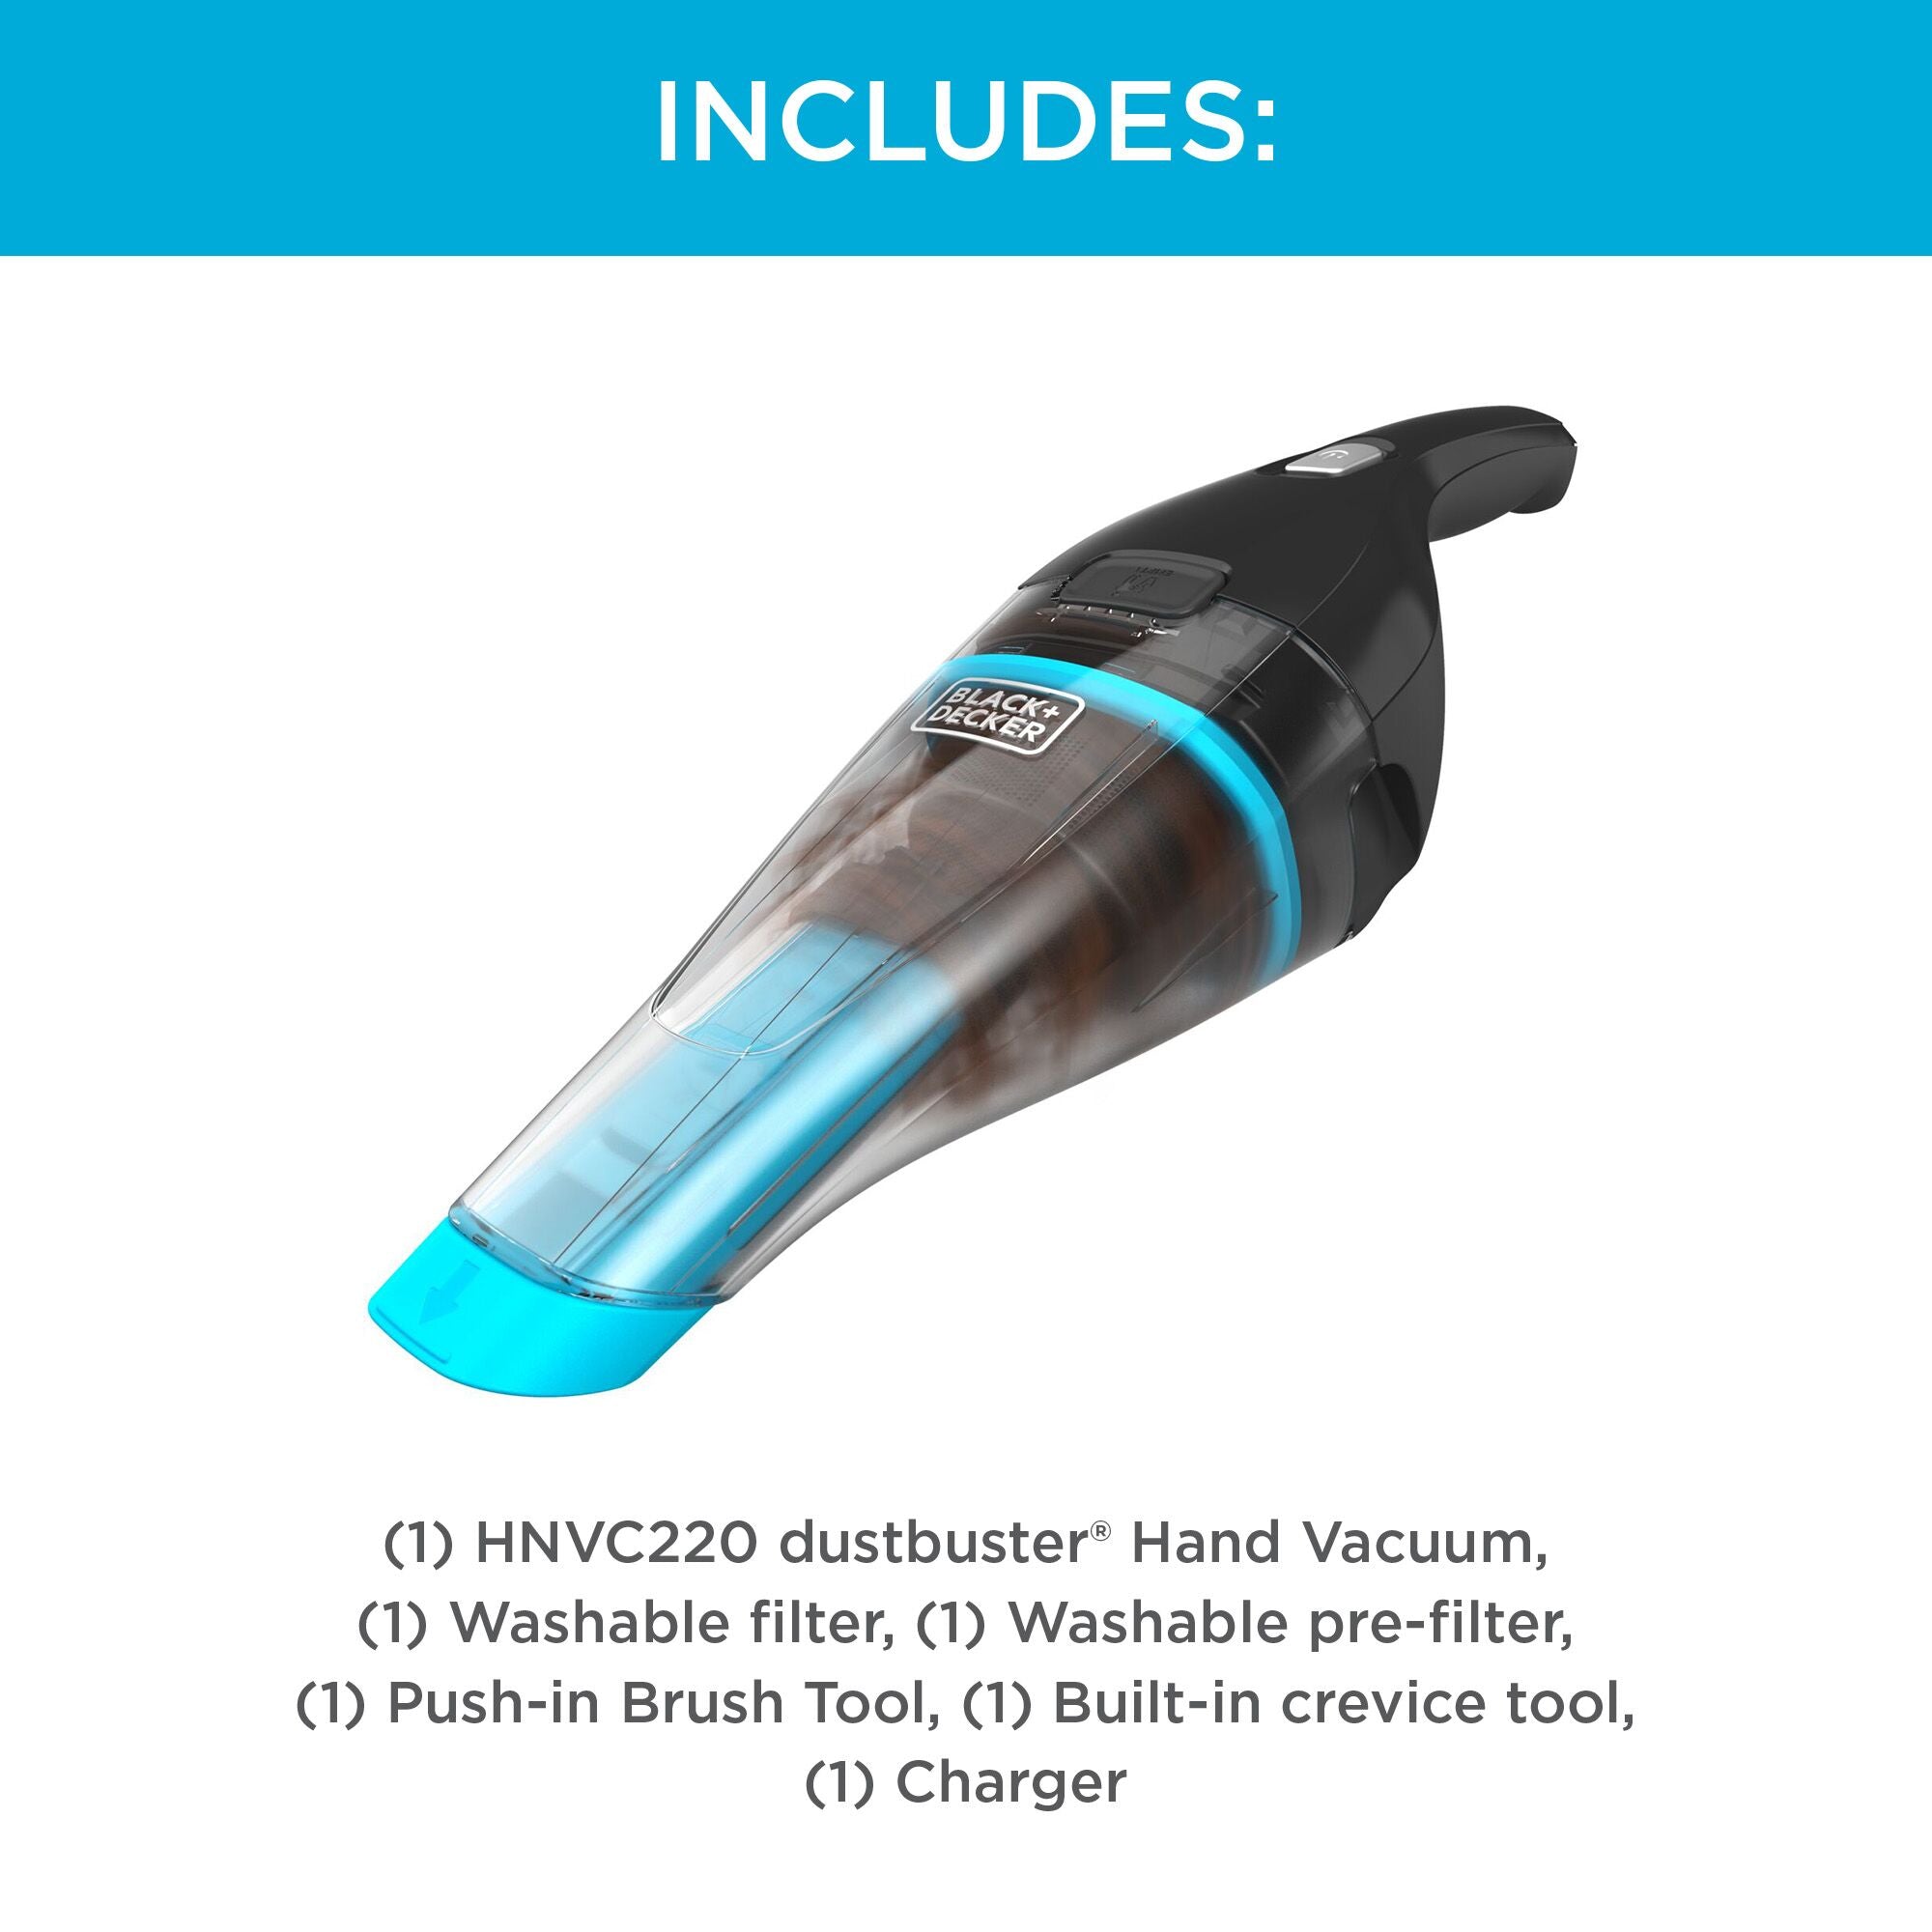 Includes: HNVC220 dustbuster® Classic™ Cordless Hand Vacuum, push-in brush, built-in crevice tool, washable filter, washable pre-filter, charger